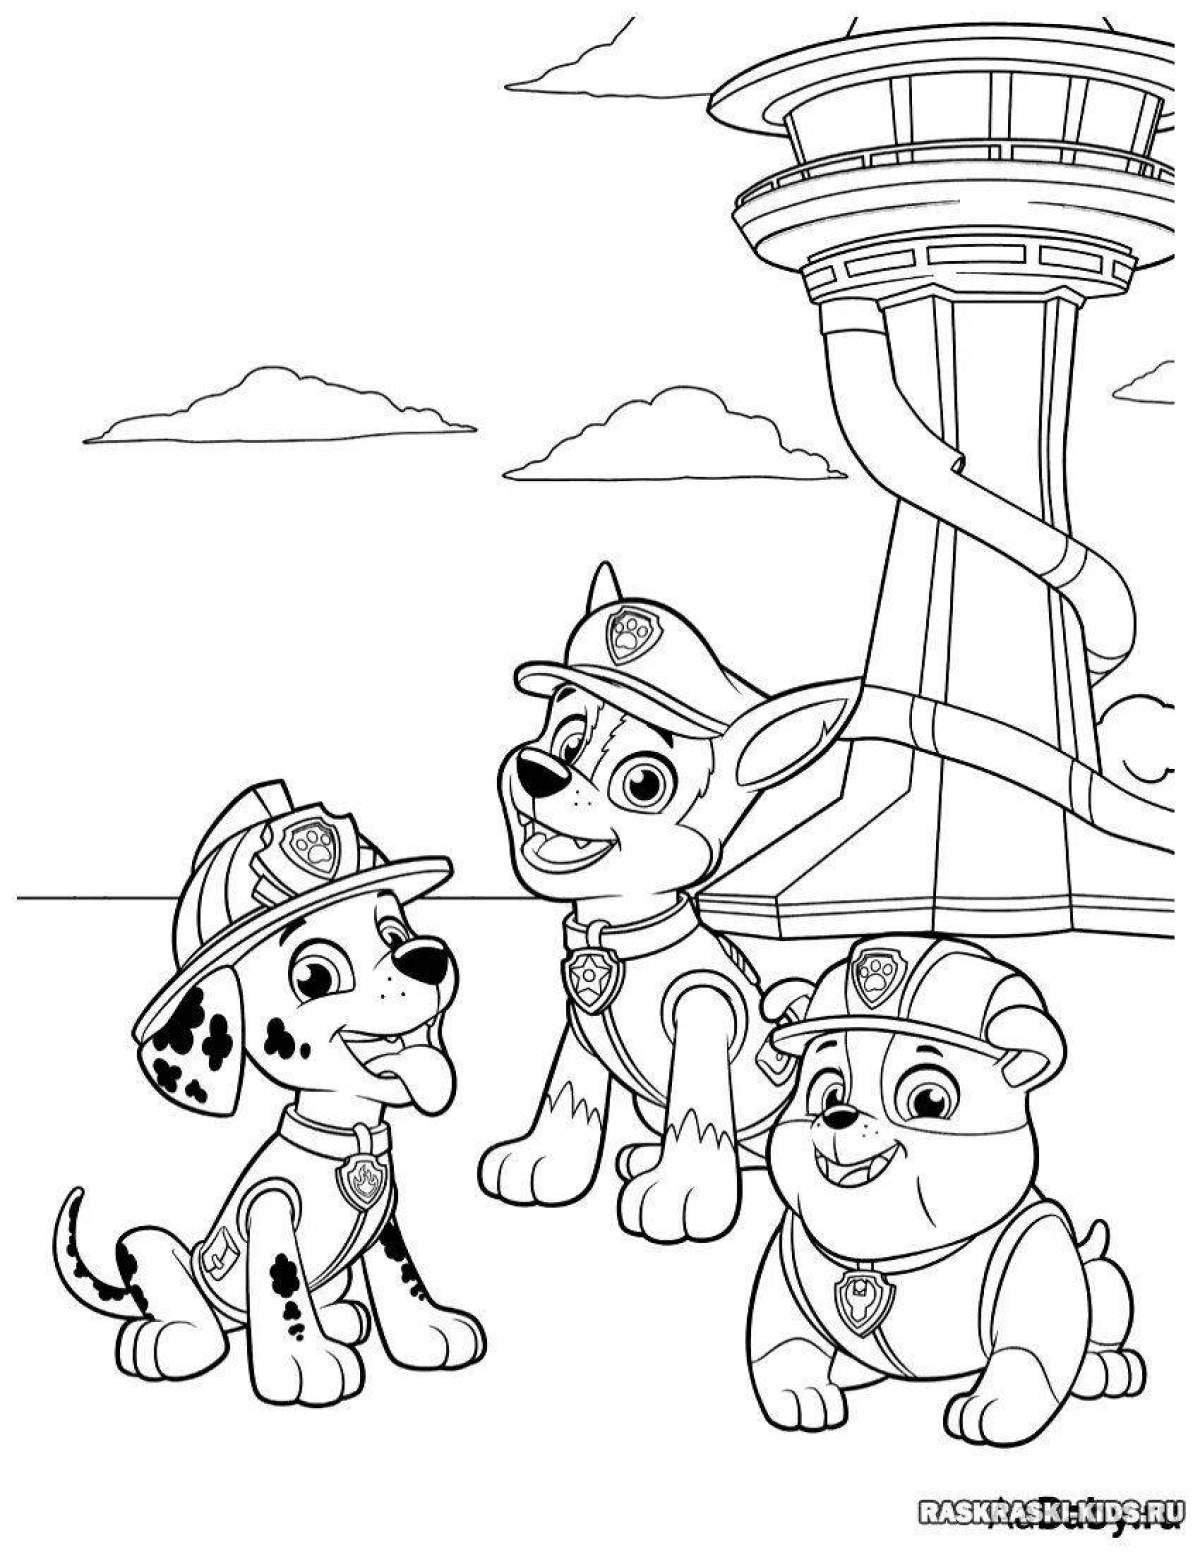 Exciting coloring paw patrol cartoon